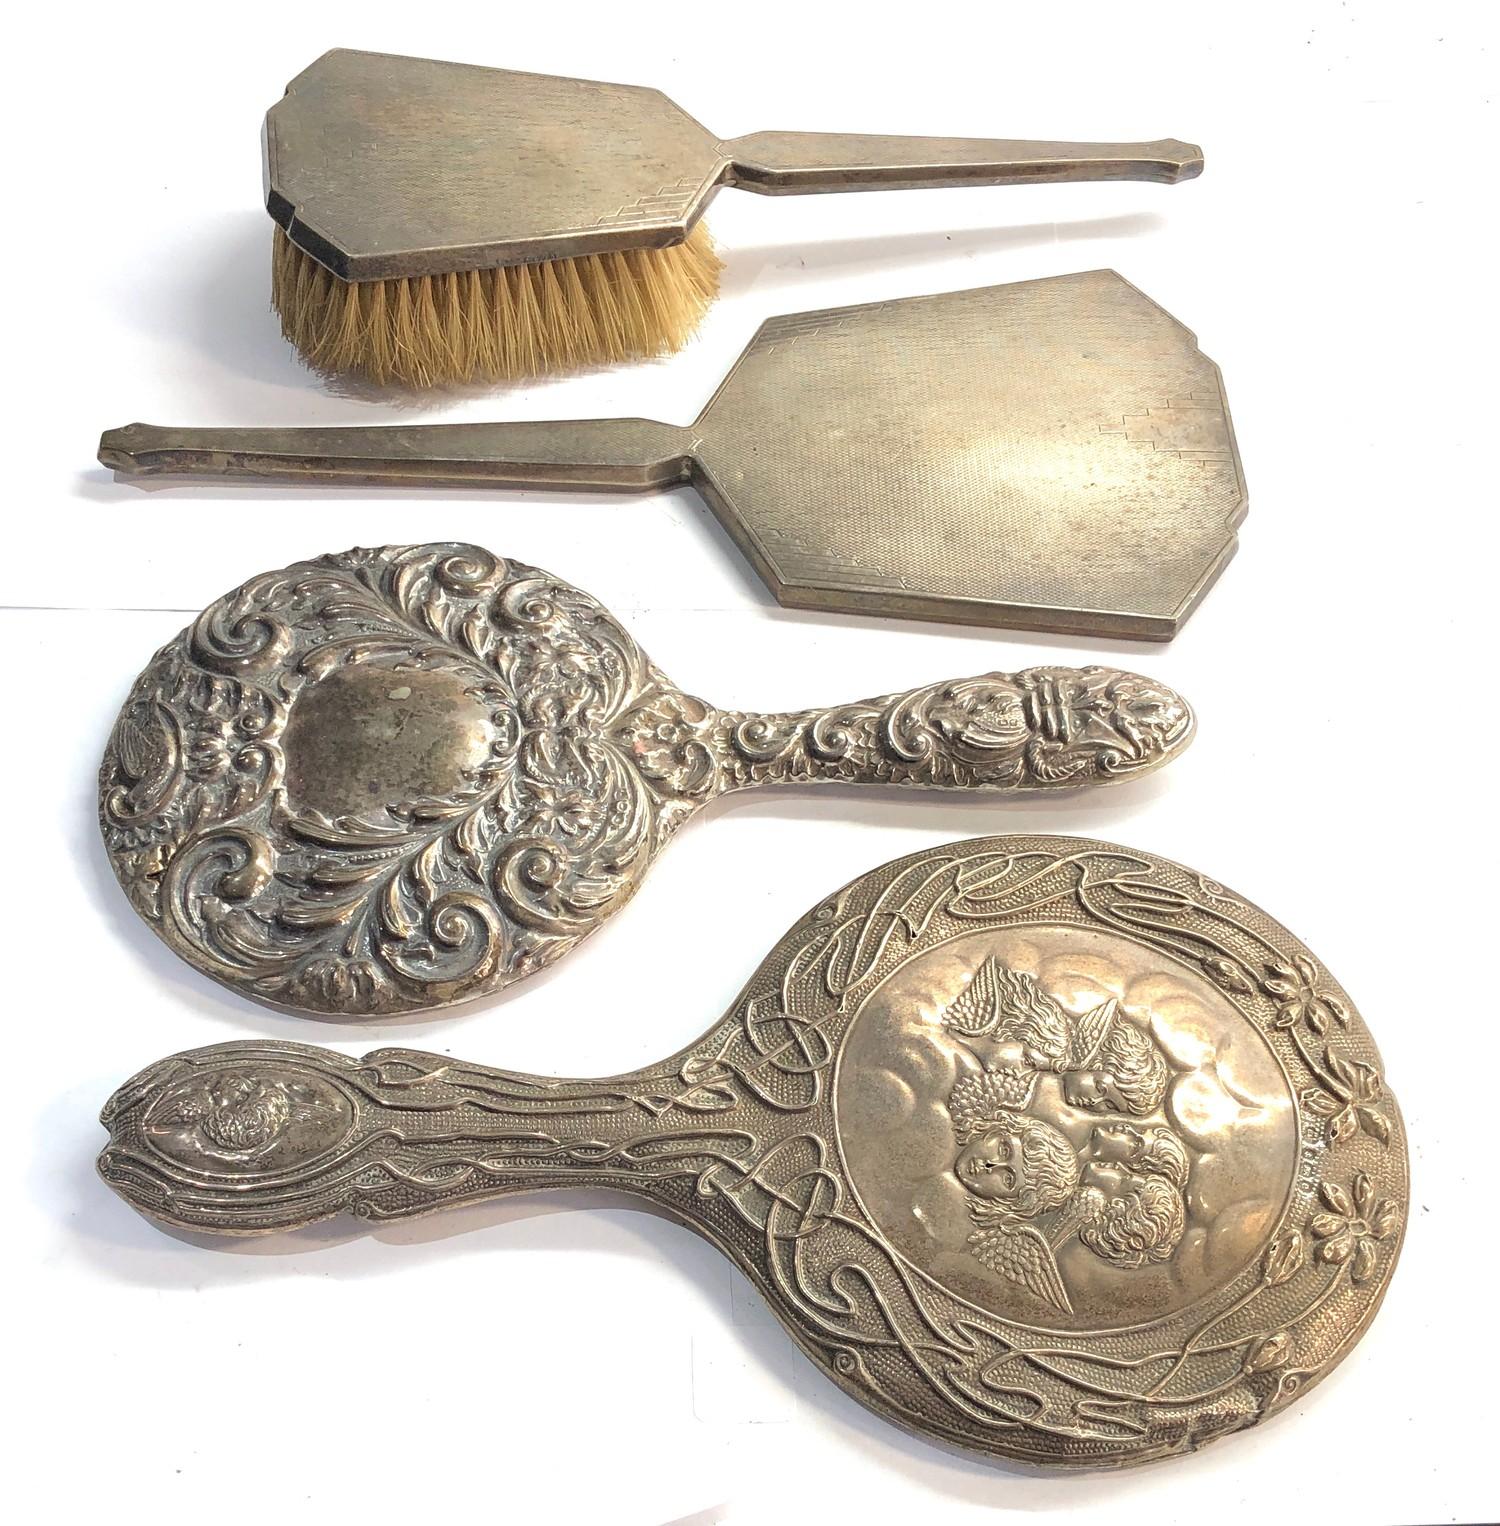 Antique silver mirrors and brushes - Image 2 of 3